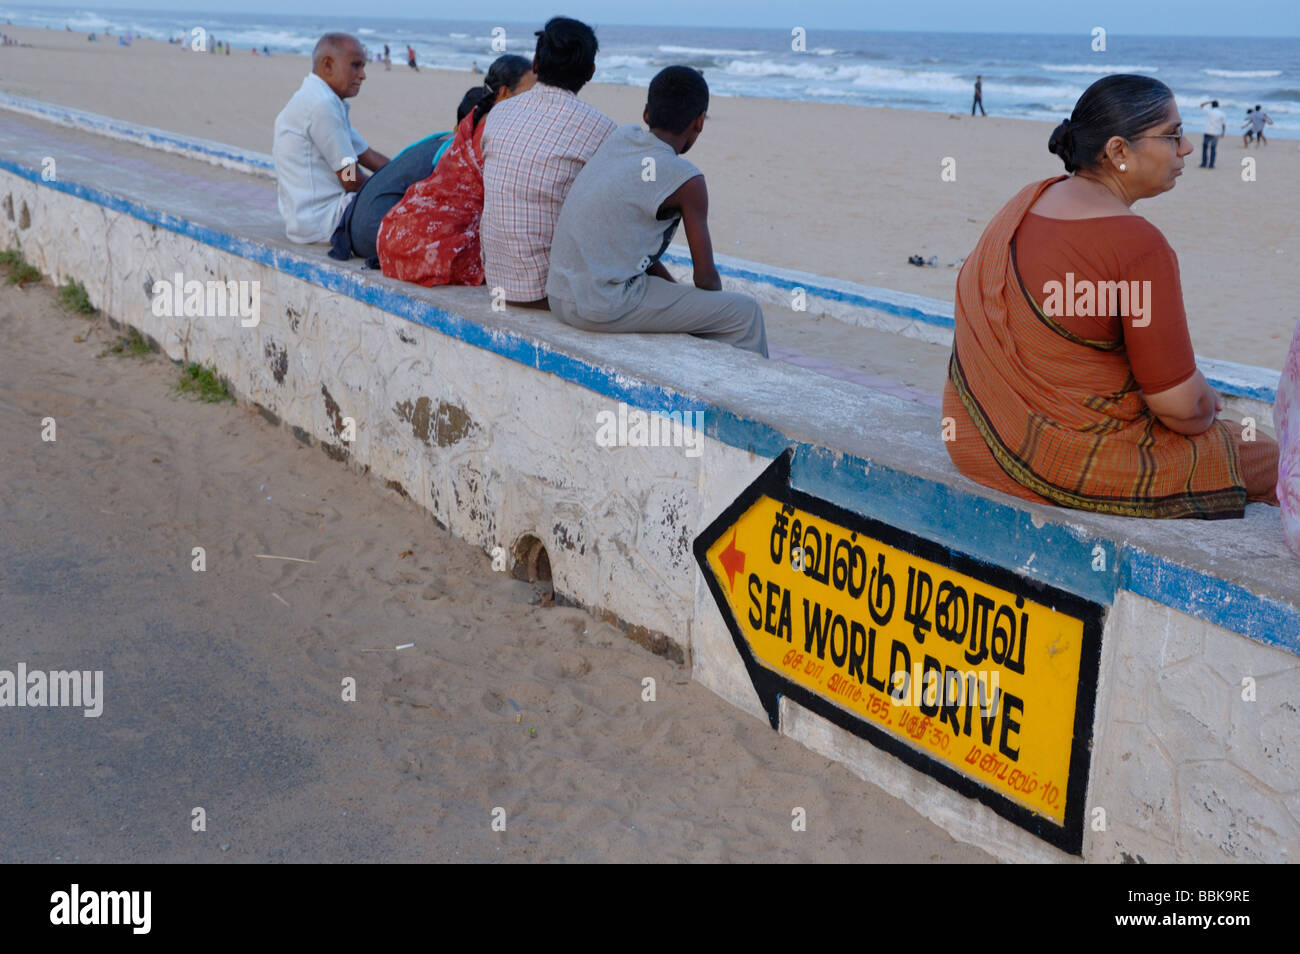 India, Tamil Nadu, Chennai (Madras). Relaxing after sunset at Chennai beach. No releases available. Stock Photo